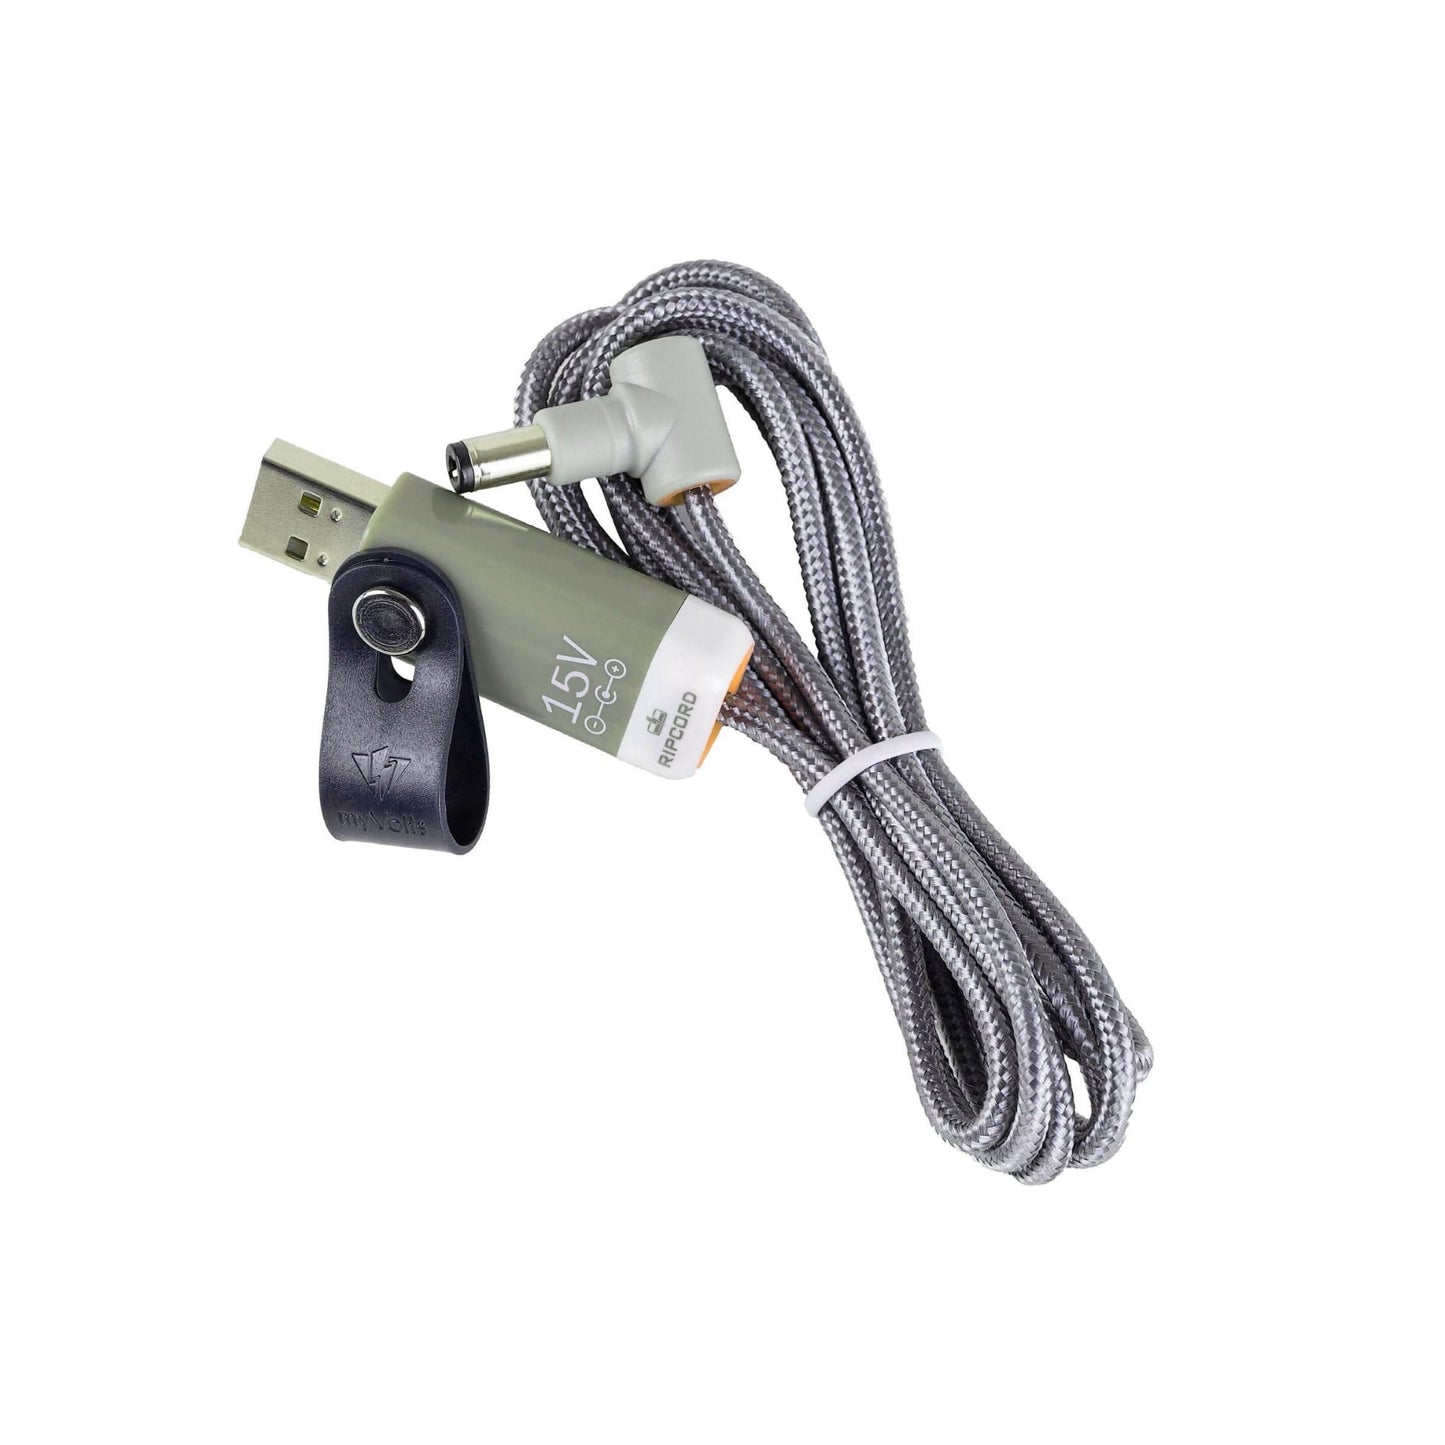 Ripcord USB to 15V DC power cable